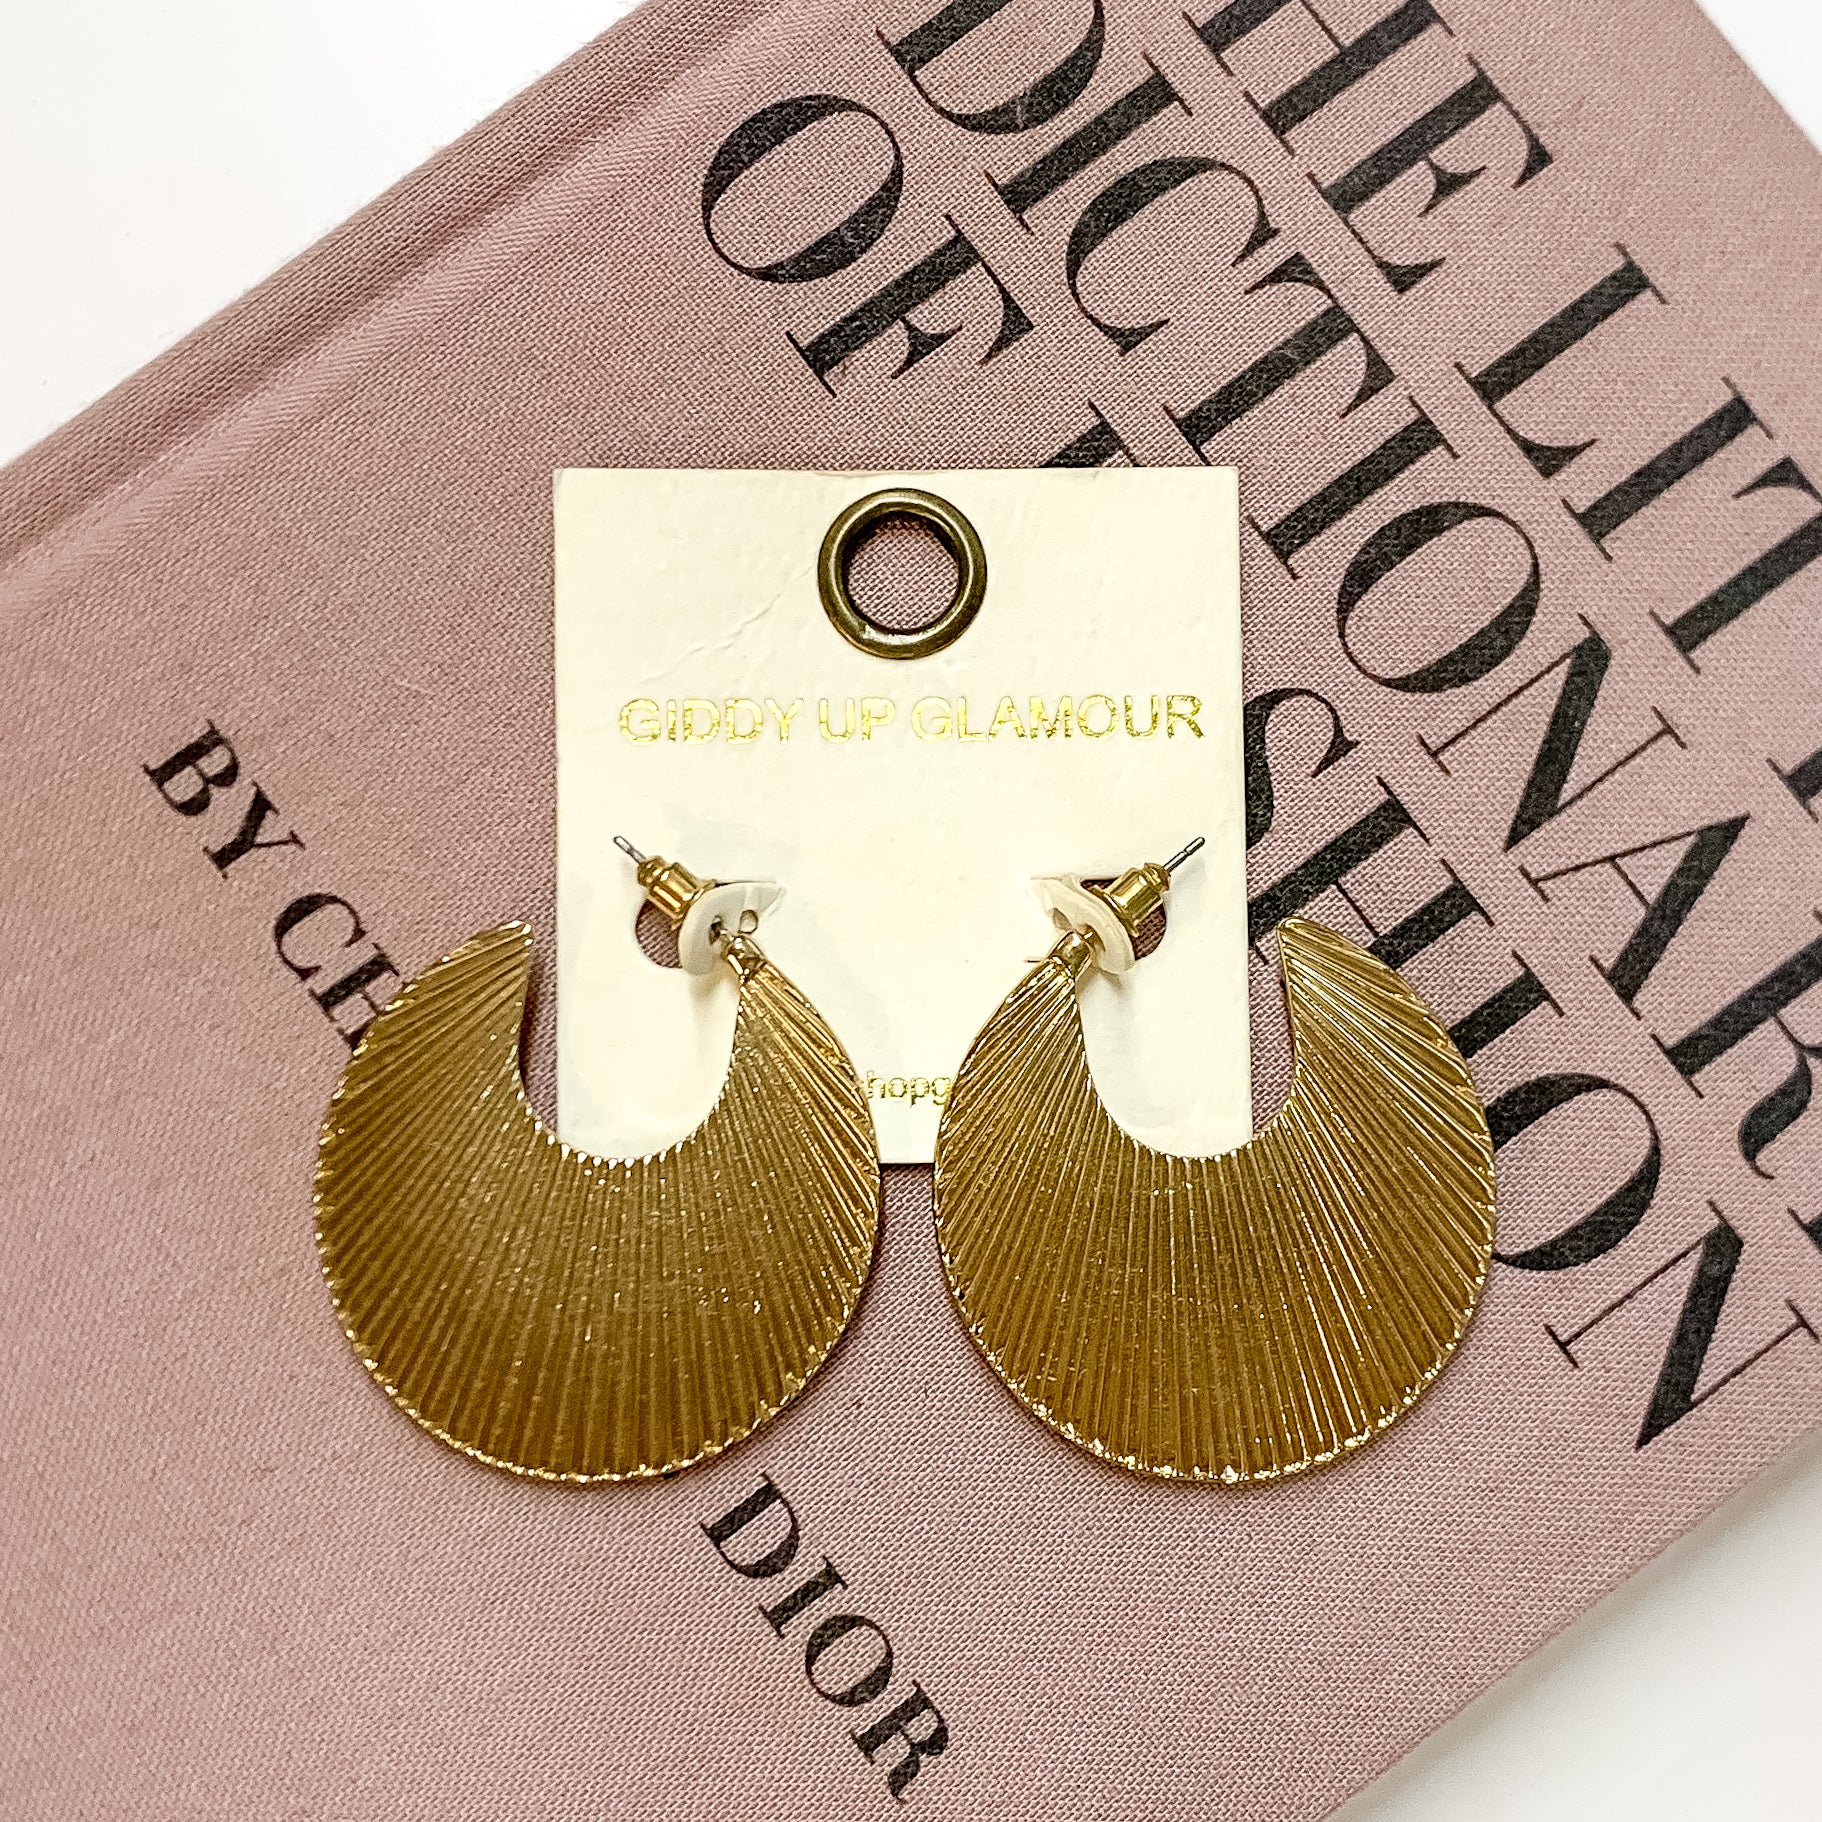 Shell Textured Irregularly Shaped Hoop Earrings in Gold Tone - Giddy Up Glamour Boutique